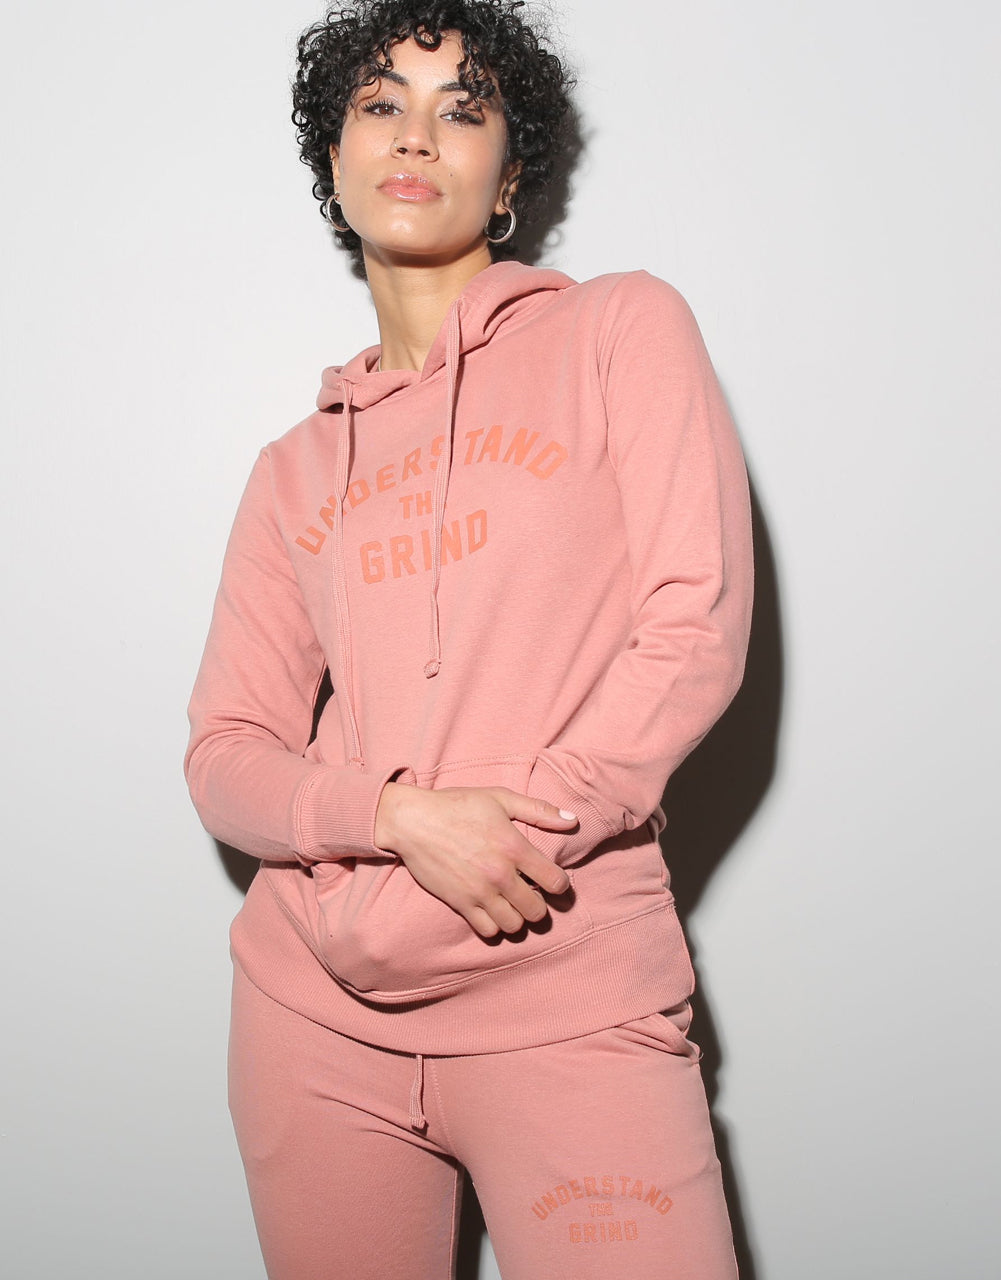 Understand the Grind Women's Pullover Hoodie - Dusty Rose